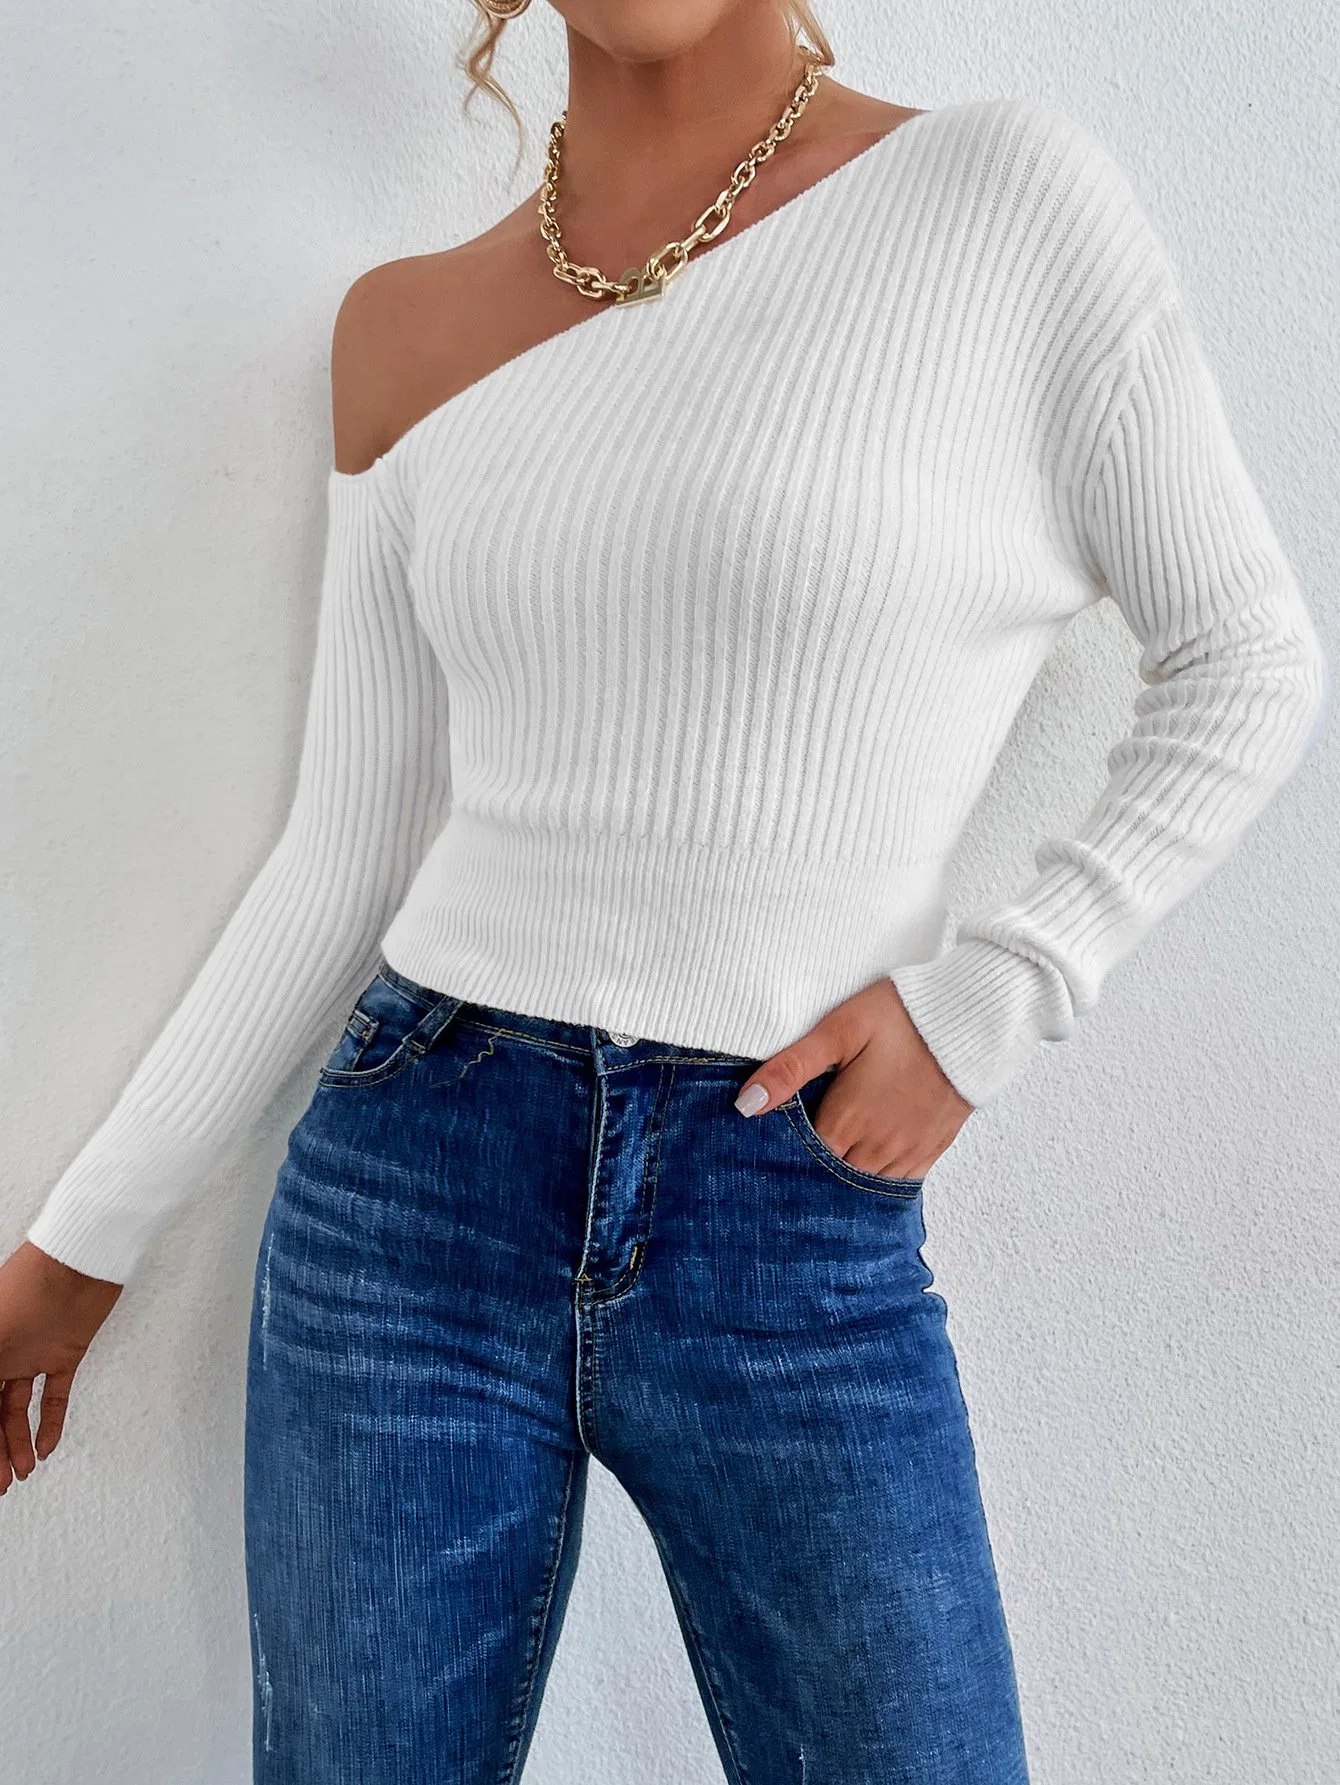 Women Clothing Slash Neck Sweaters Pure Color Slim Sweaters Apparel Stock